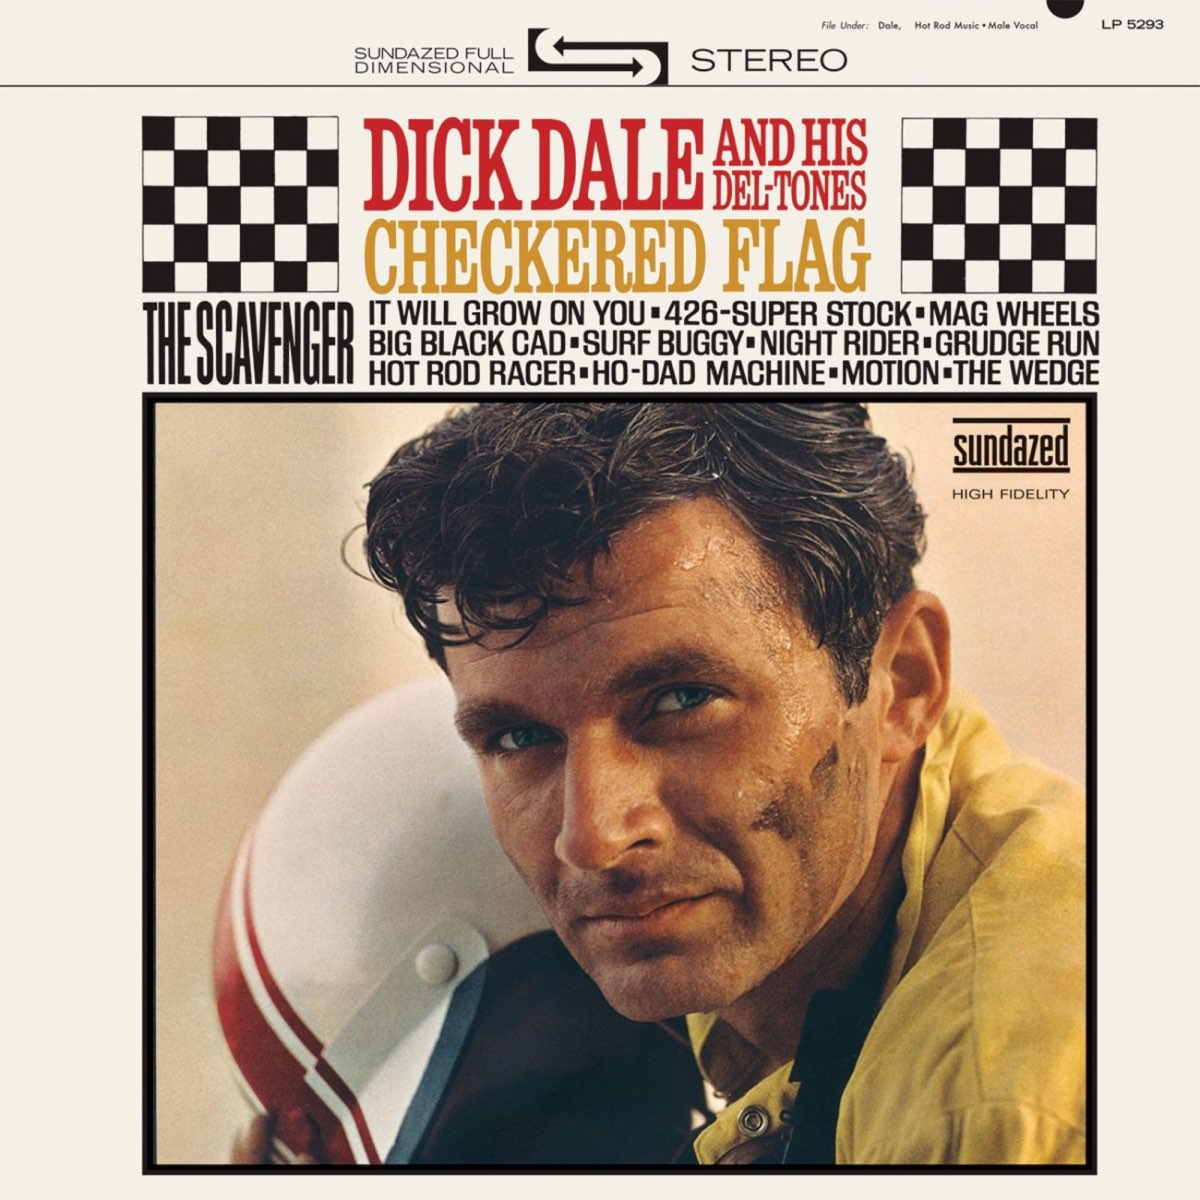 Night rider by dick dale